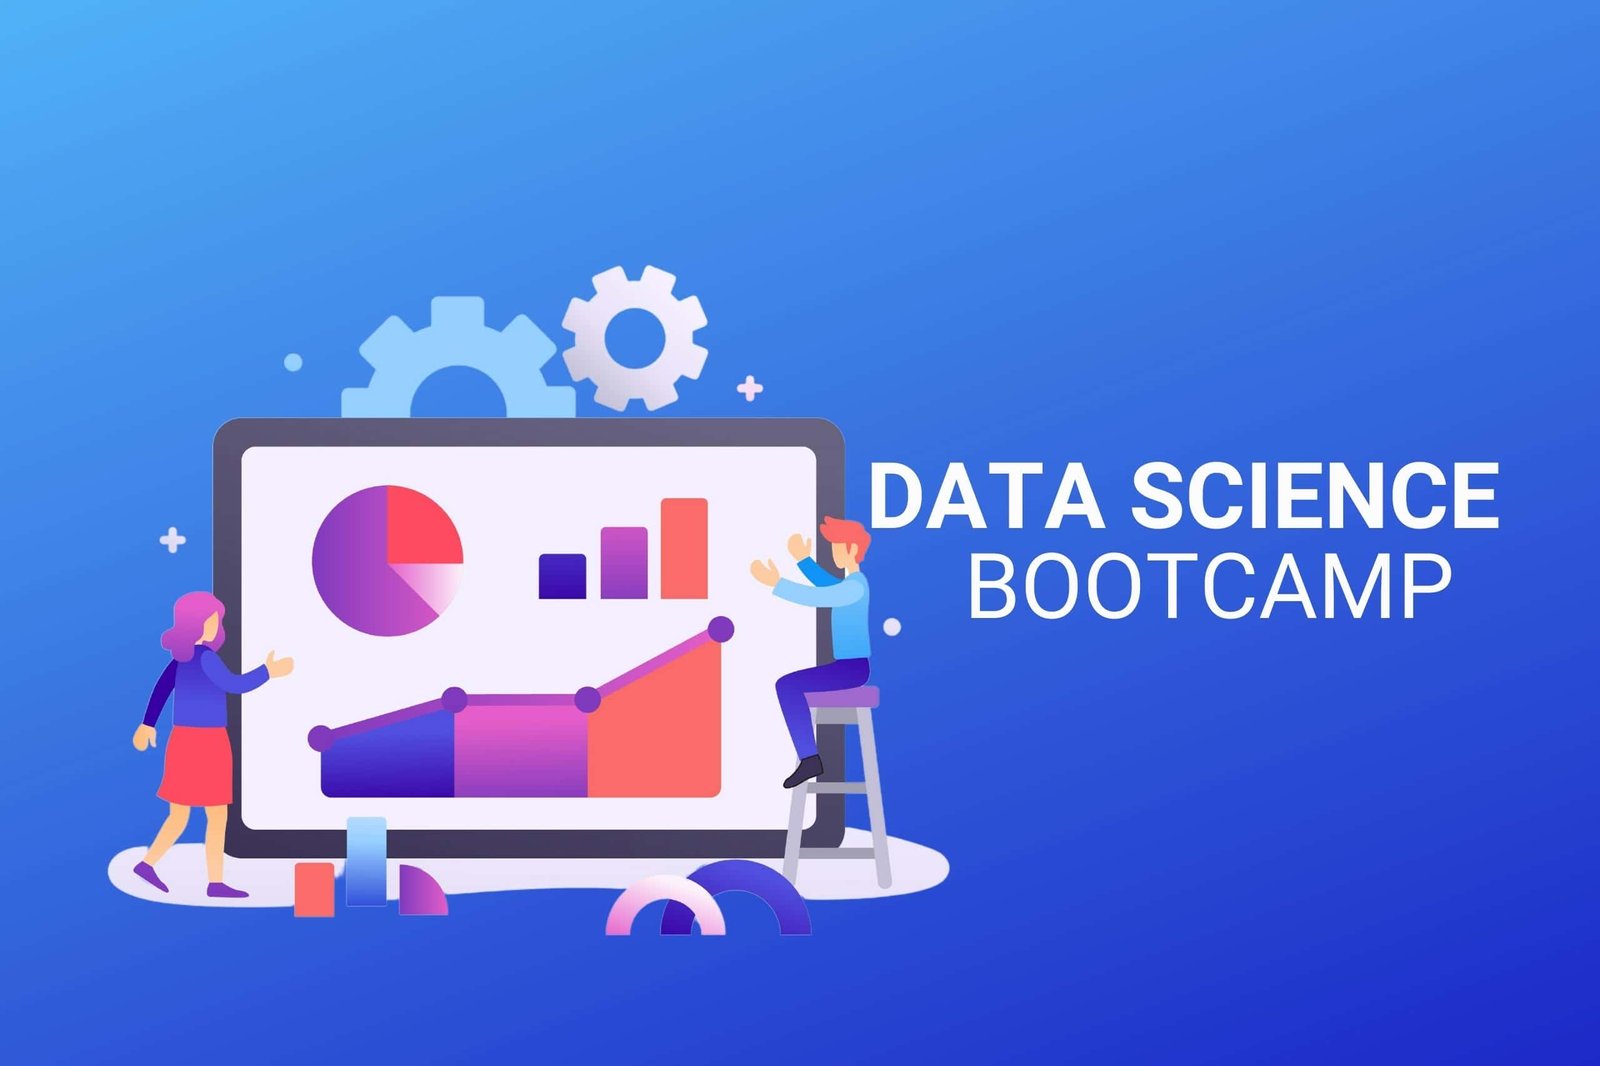 Are Data Science Bootcamps Worth It?